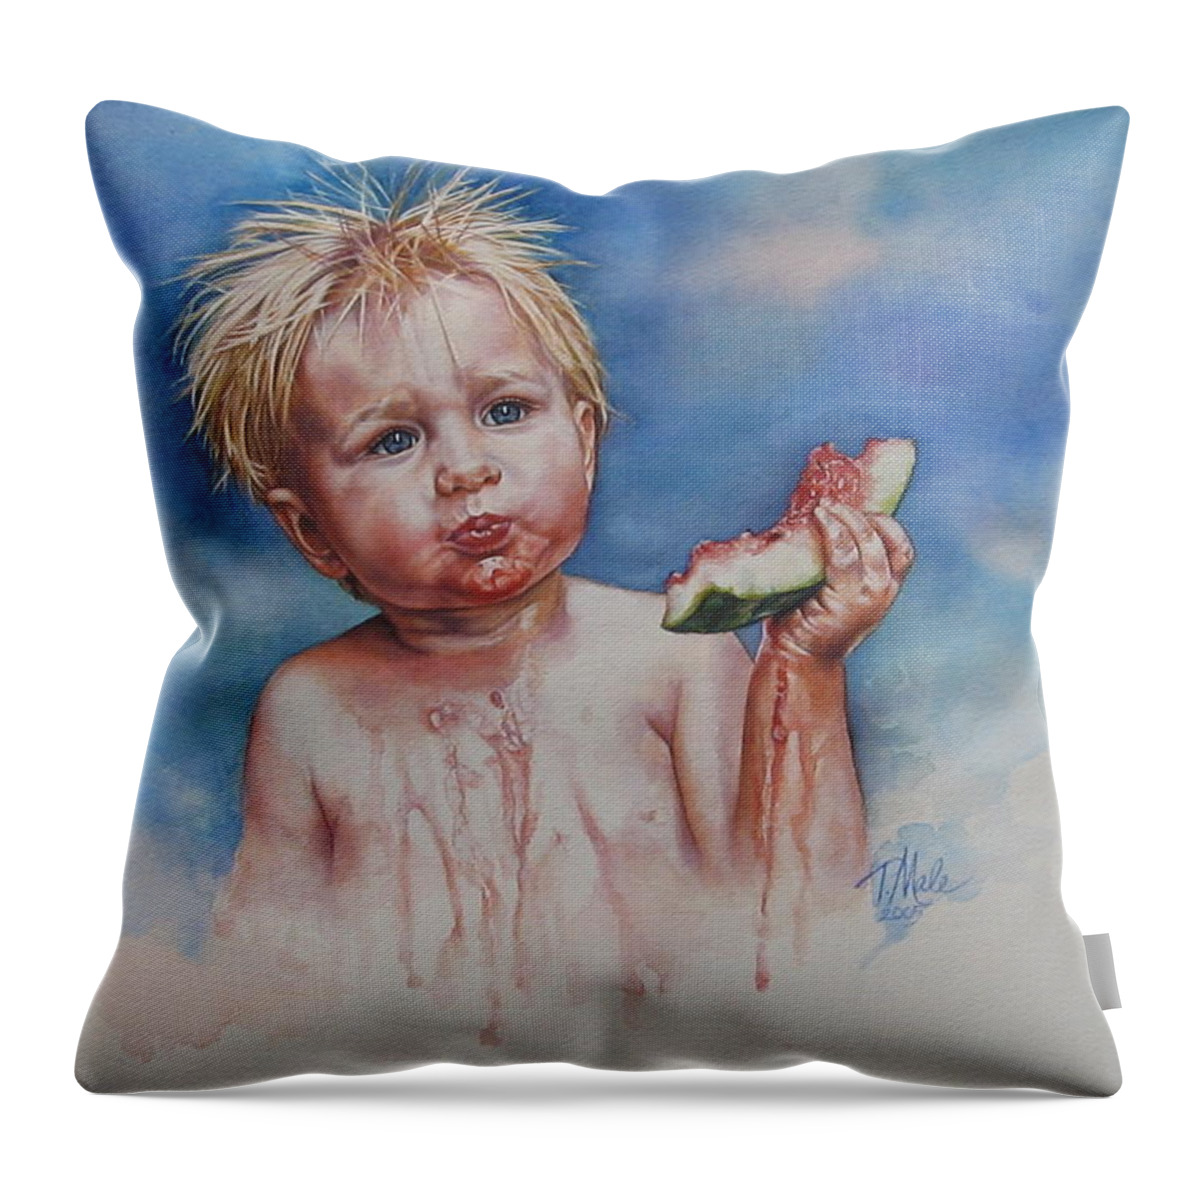 Little Boy With Watermelon Painting Throw Pillow featuring the painting Juicy by Tracy Male